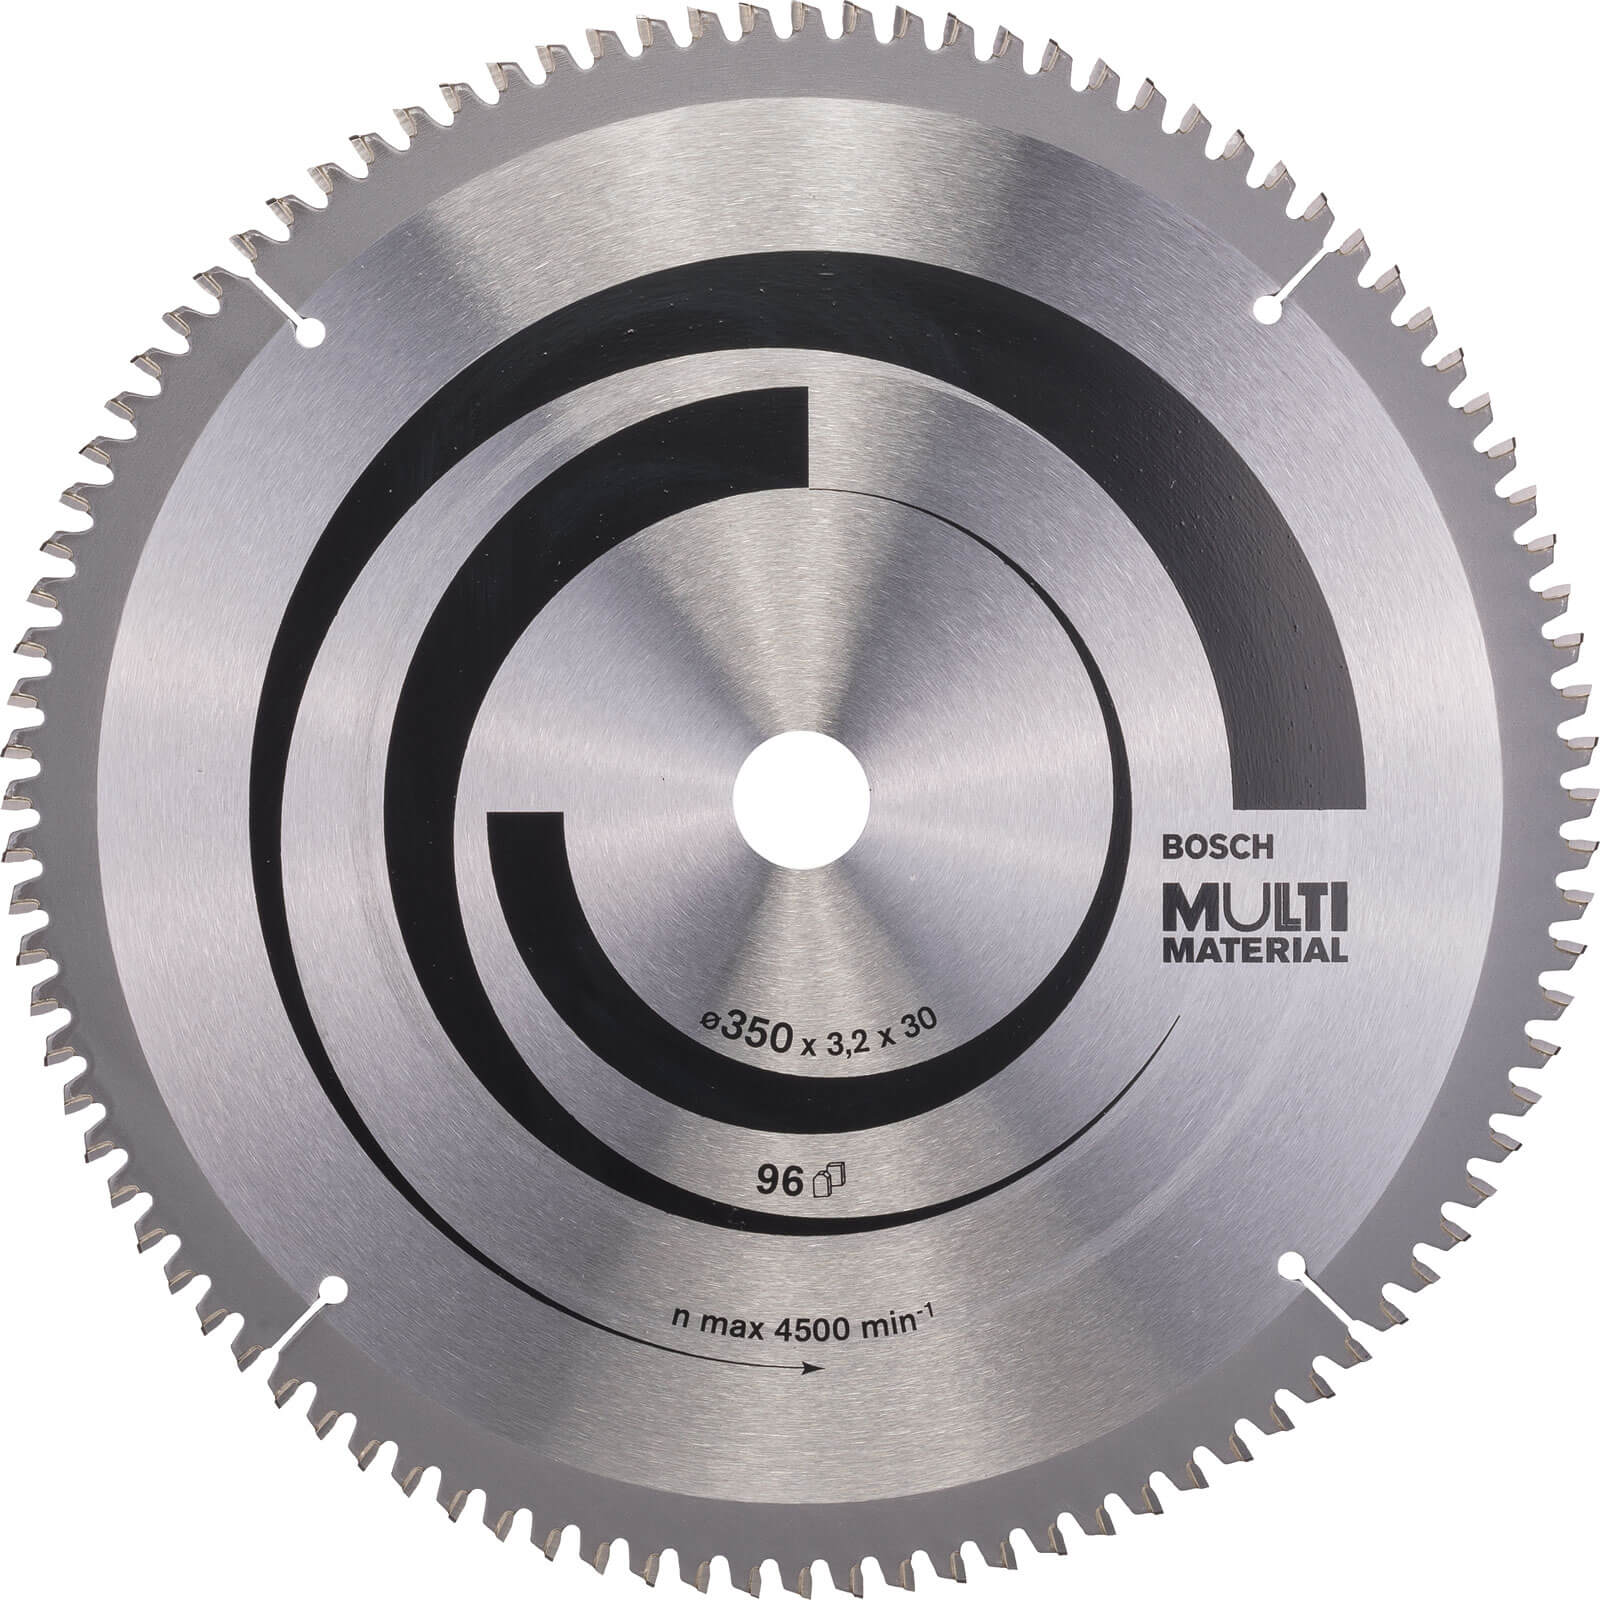 Bosch Multi Material Cutting Mitre and Table Saw Blade 350mm 90T 30mm